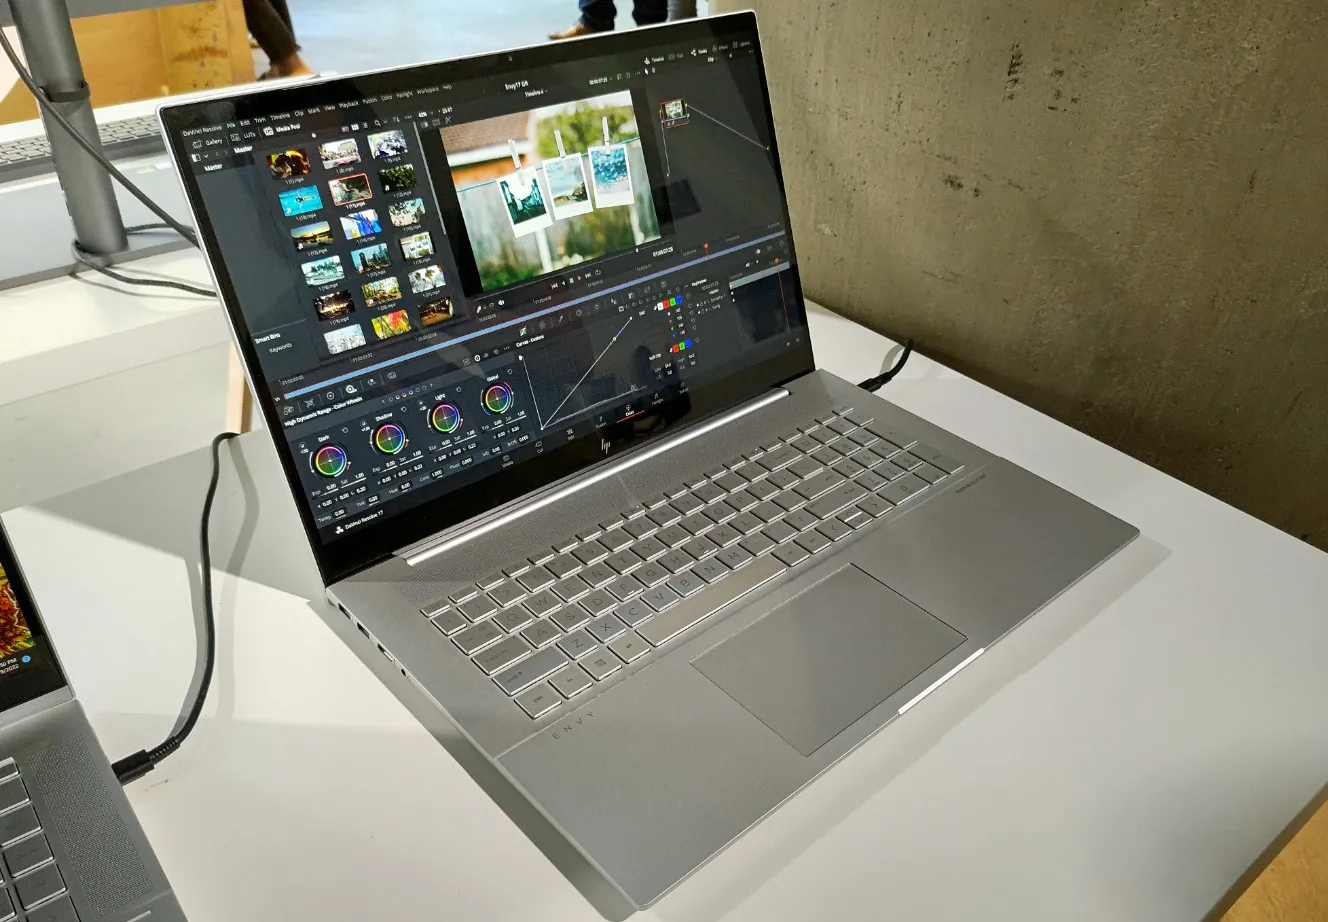 This image shows the HP Envy 16 on the table.